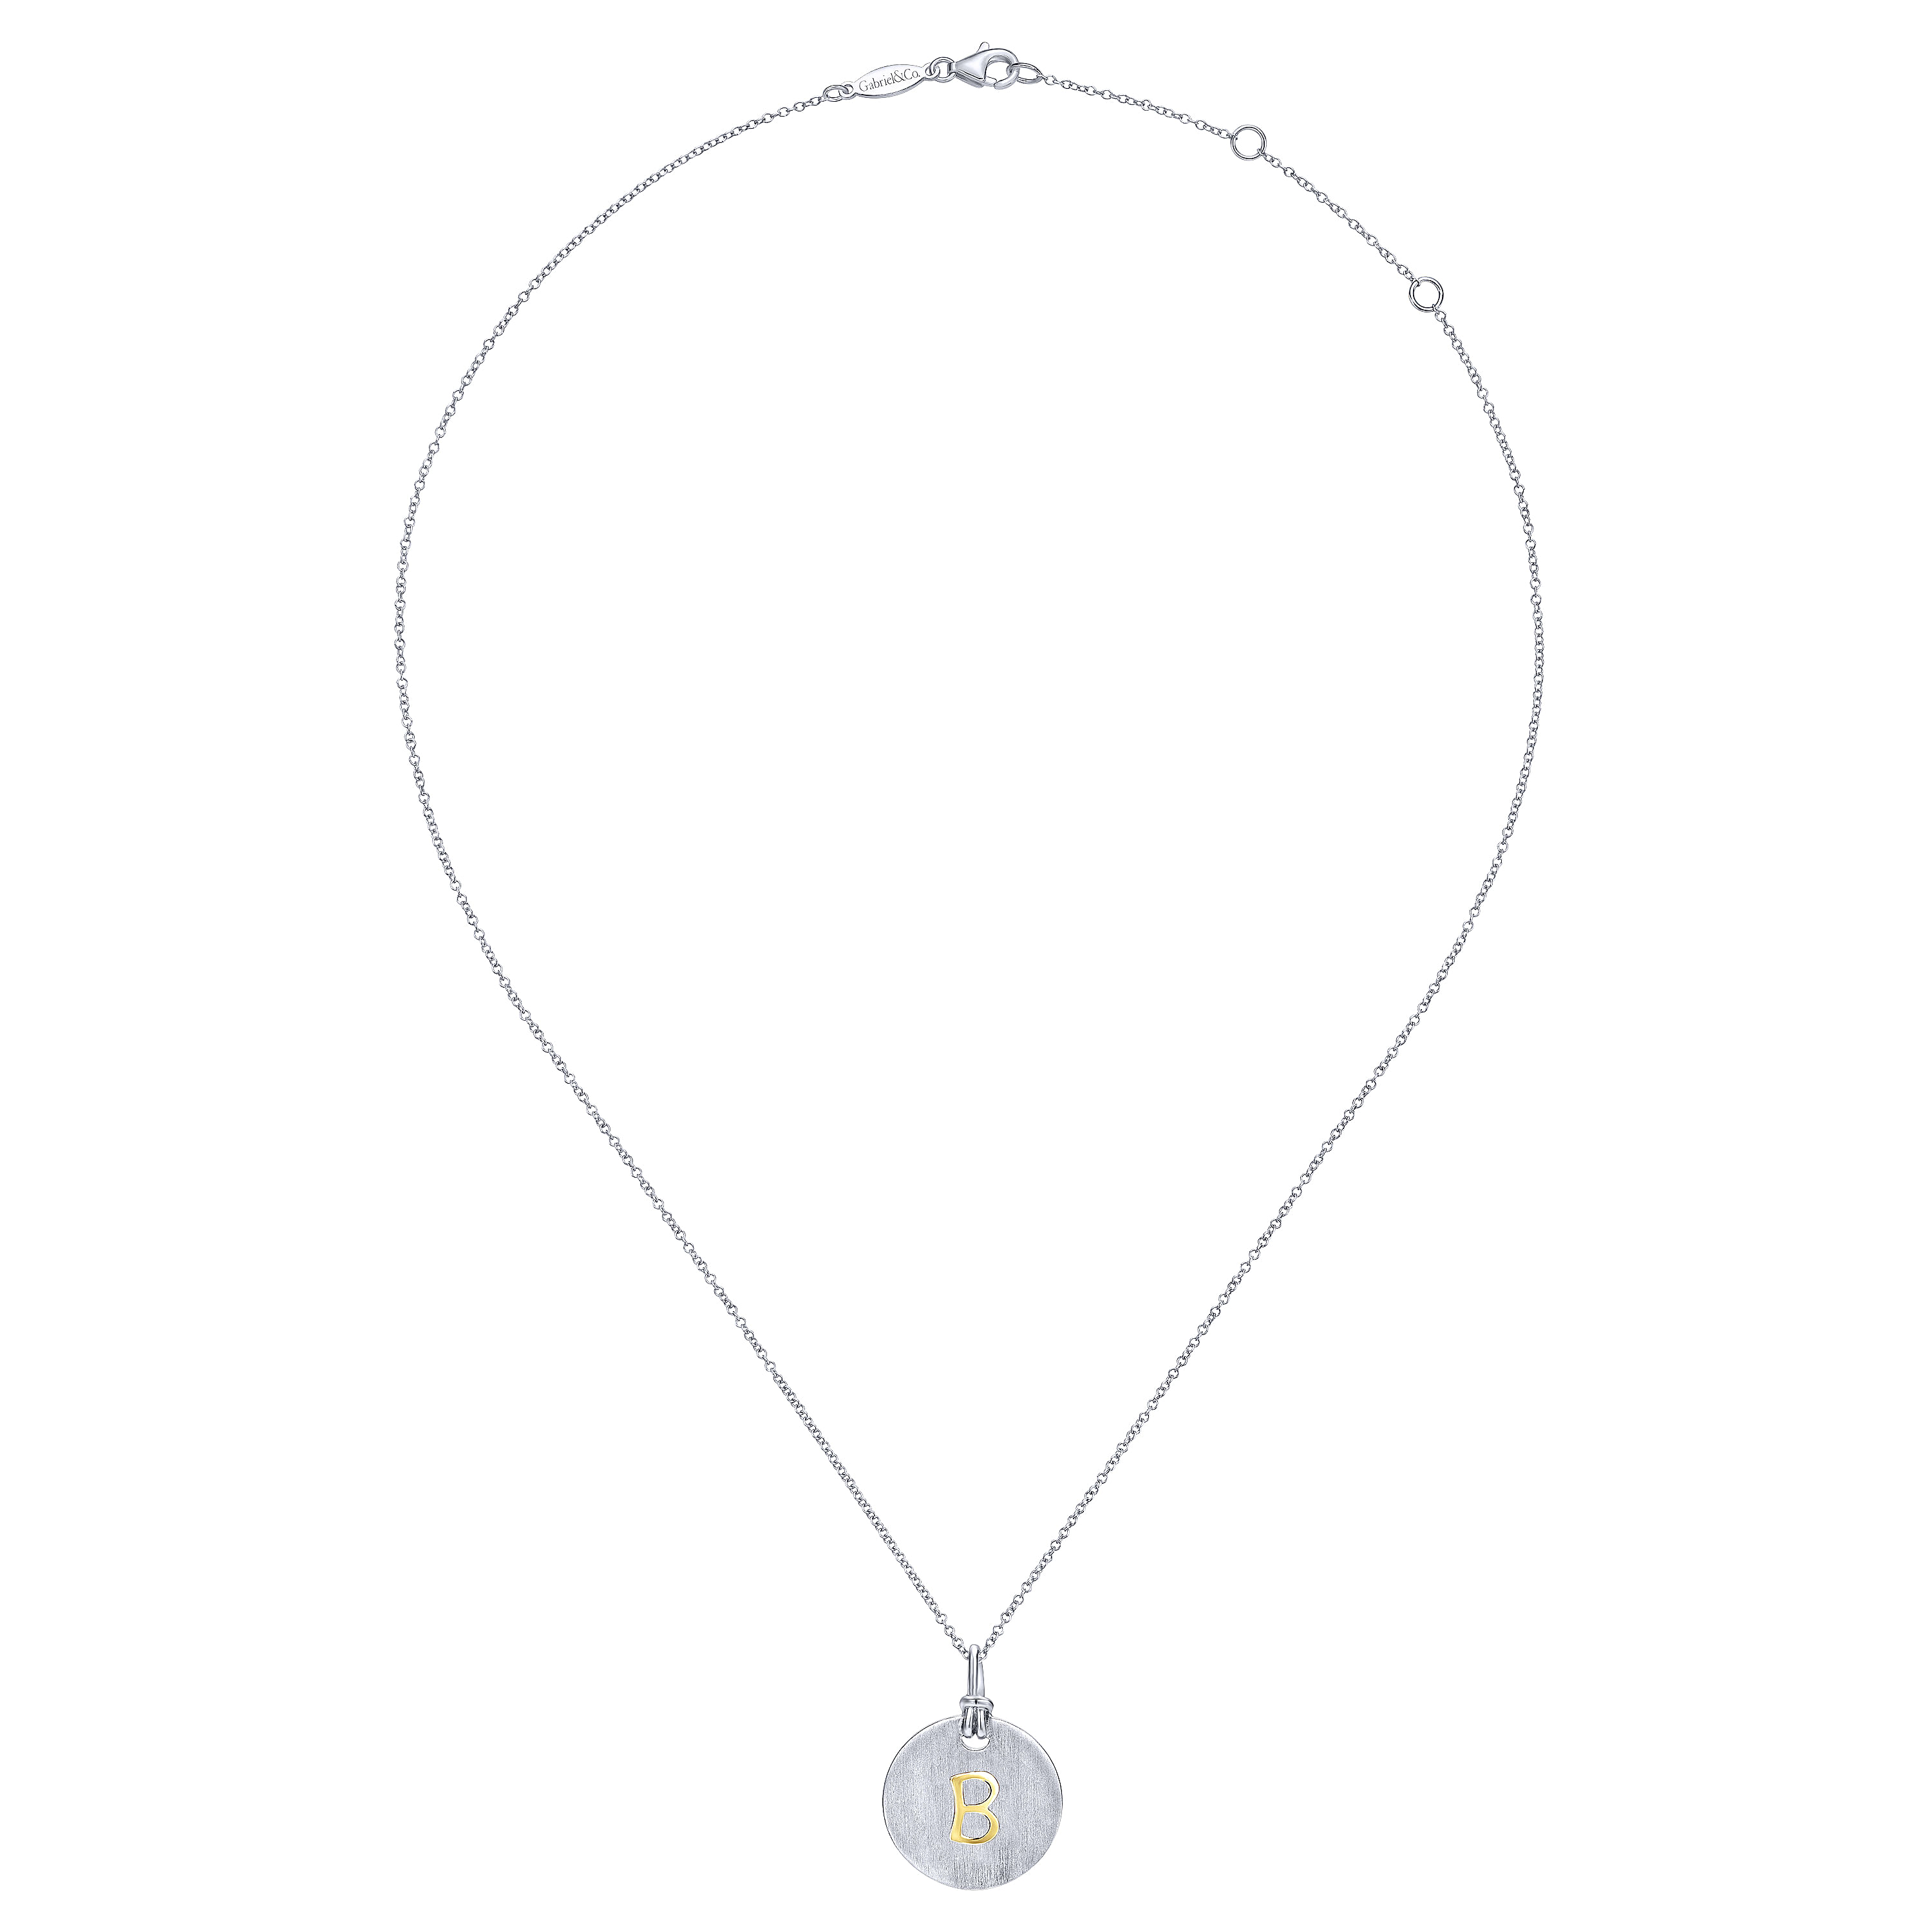 Silver 18K Yellow B Initial Round Disk Necklace